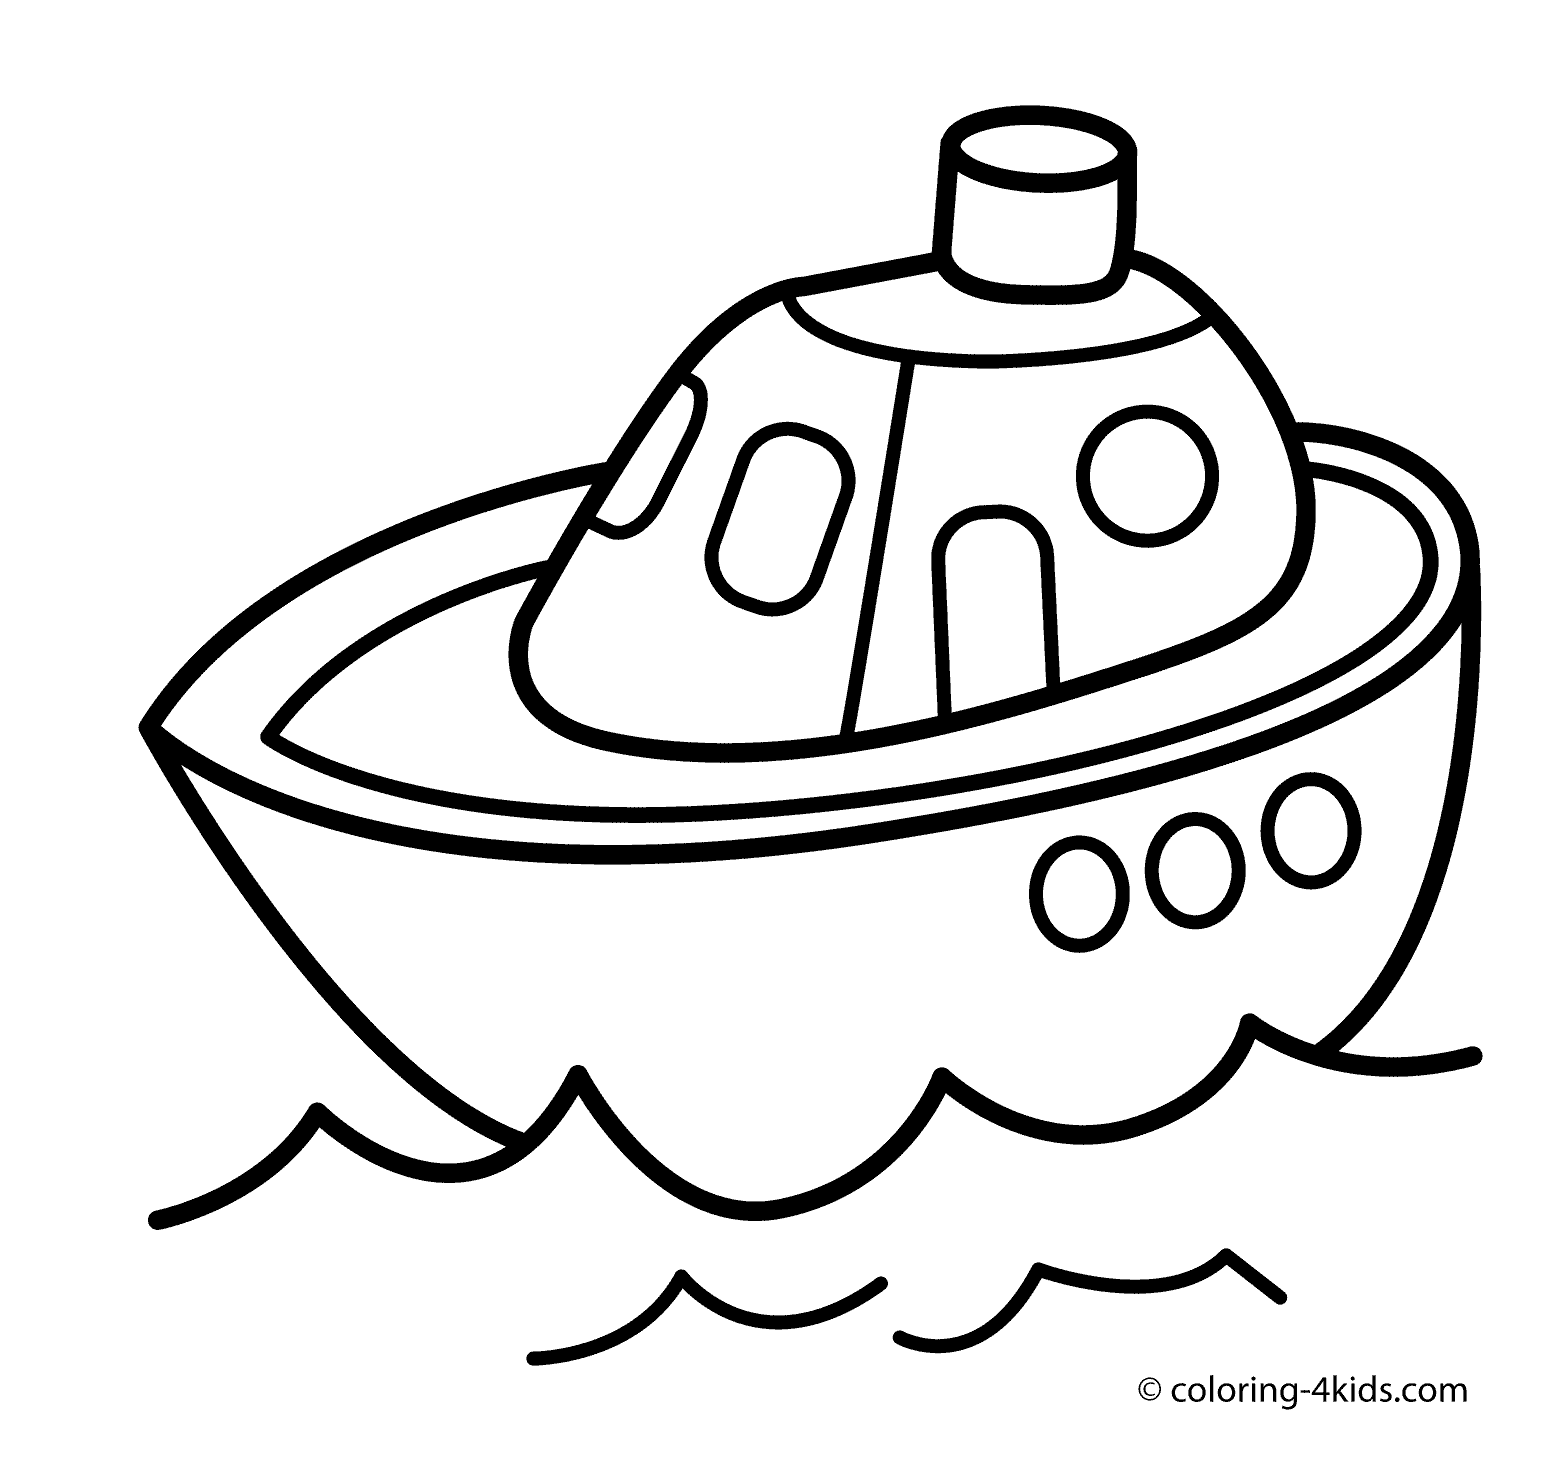 Transportation Coloring Pages For Toddlers Transportation Coloring ...